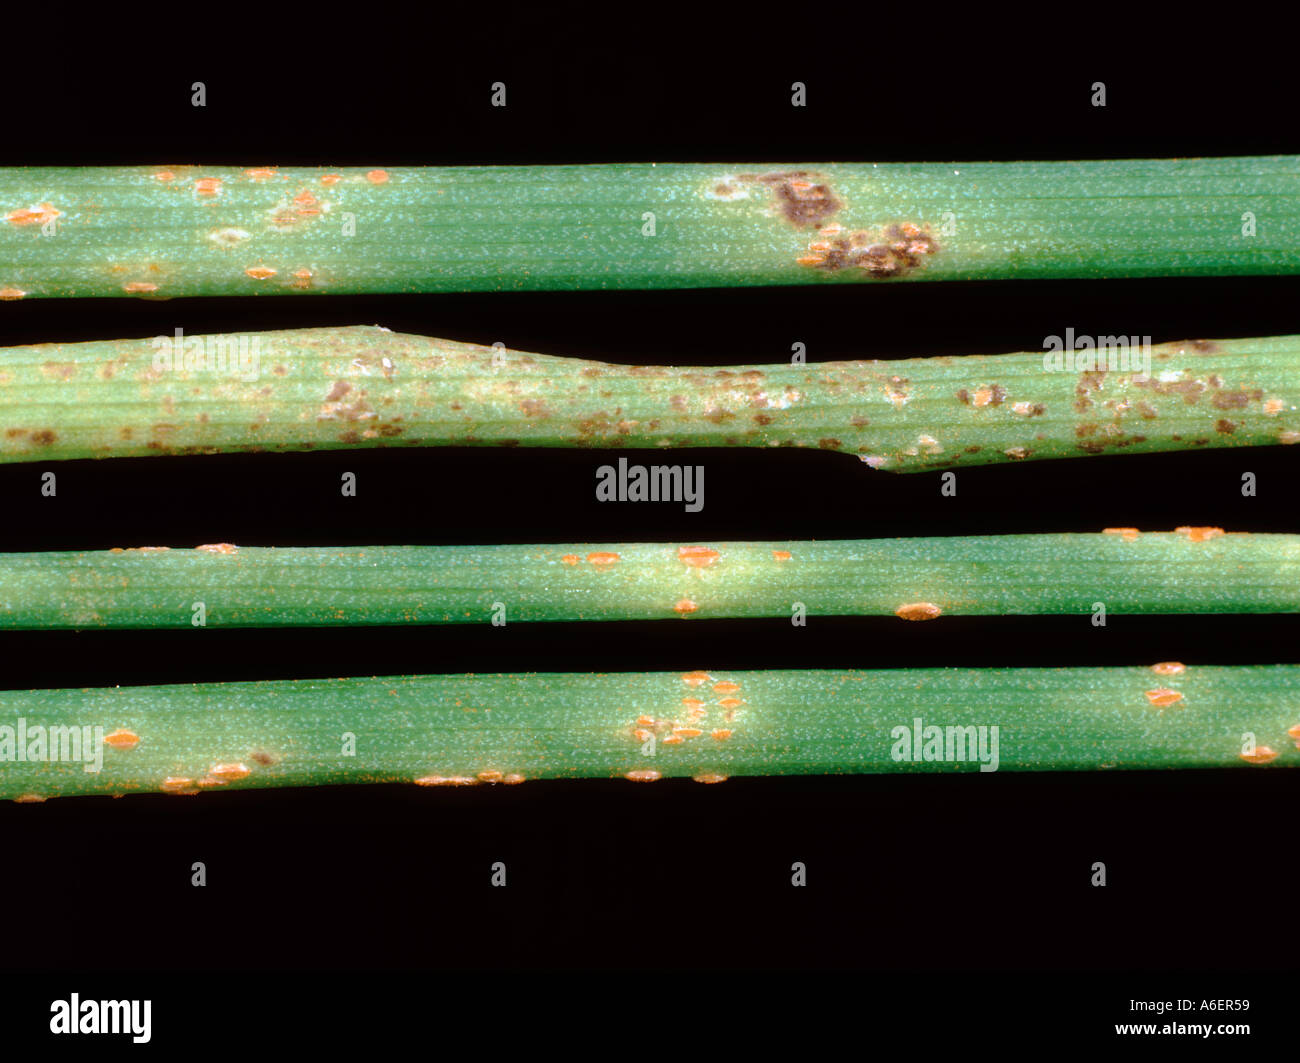 Onion rust Puccinia allii on chives leaves Stock Photo